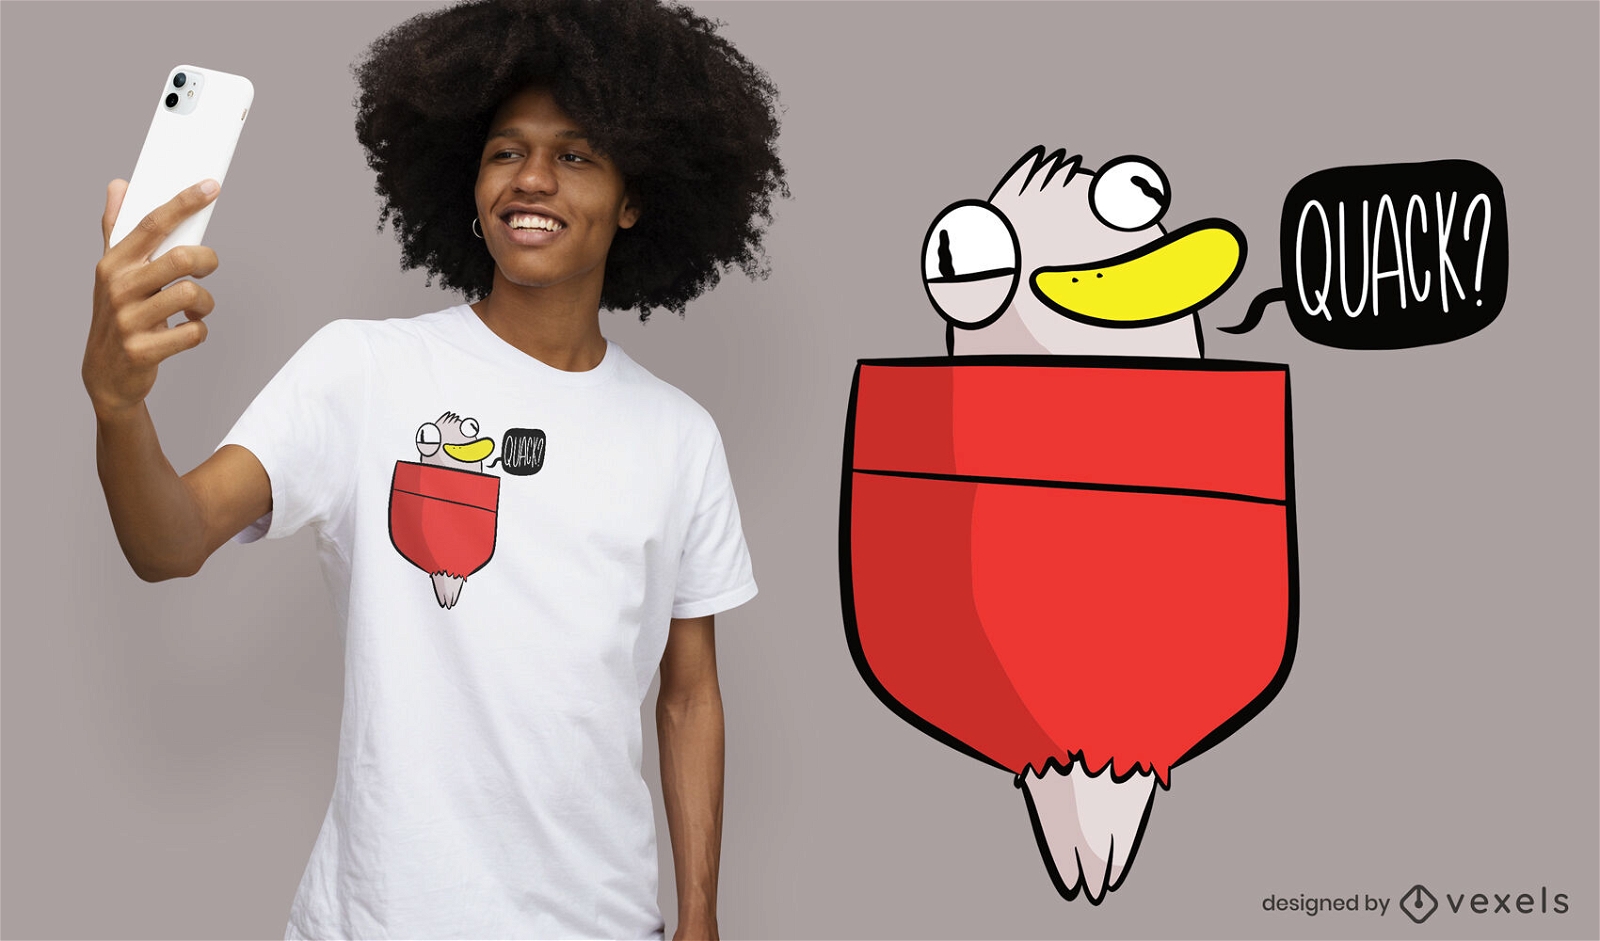 Funny duck in a pocket t-shirt design